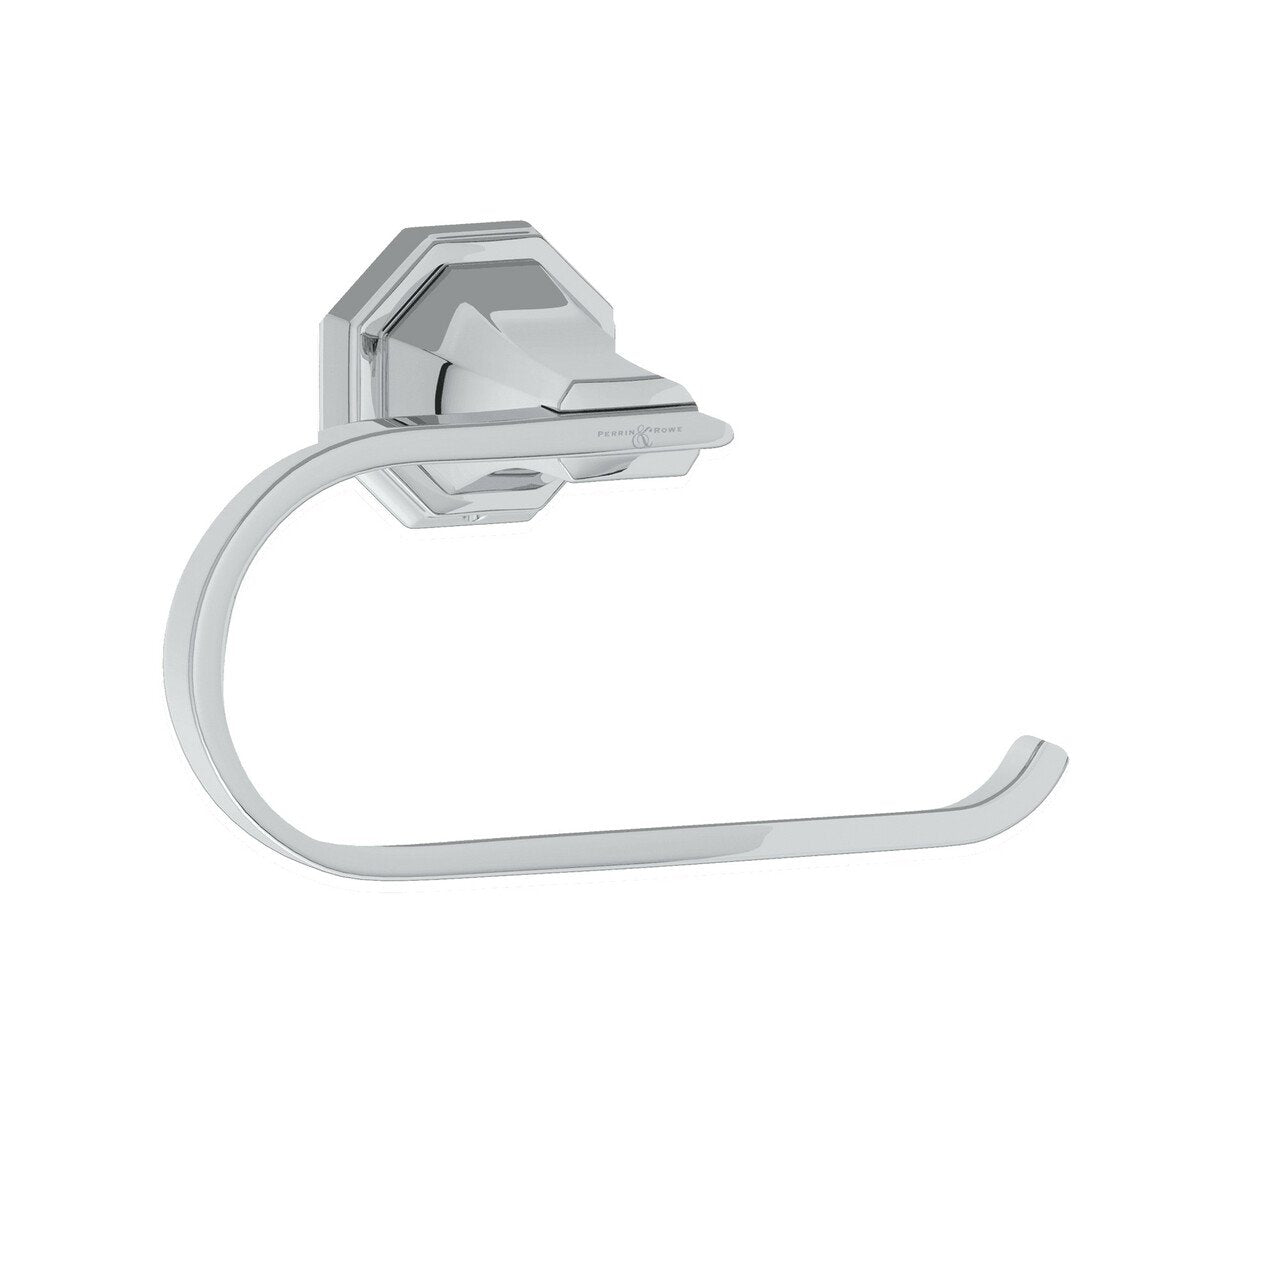 Perrin & Rowe Deco Wall Mount Toilet Paper Holder - BNGBath